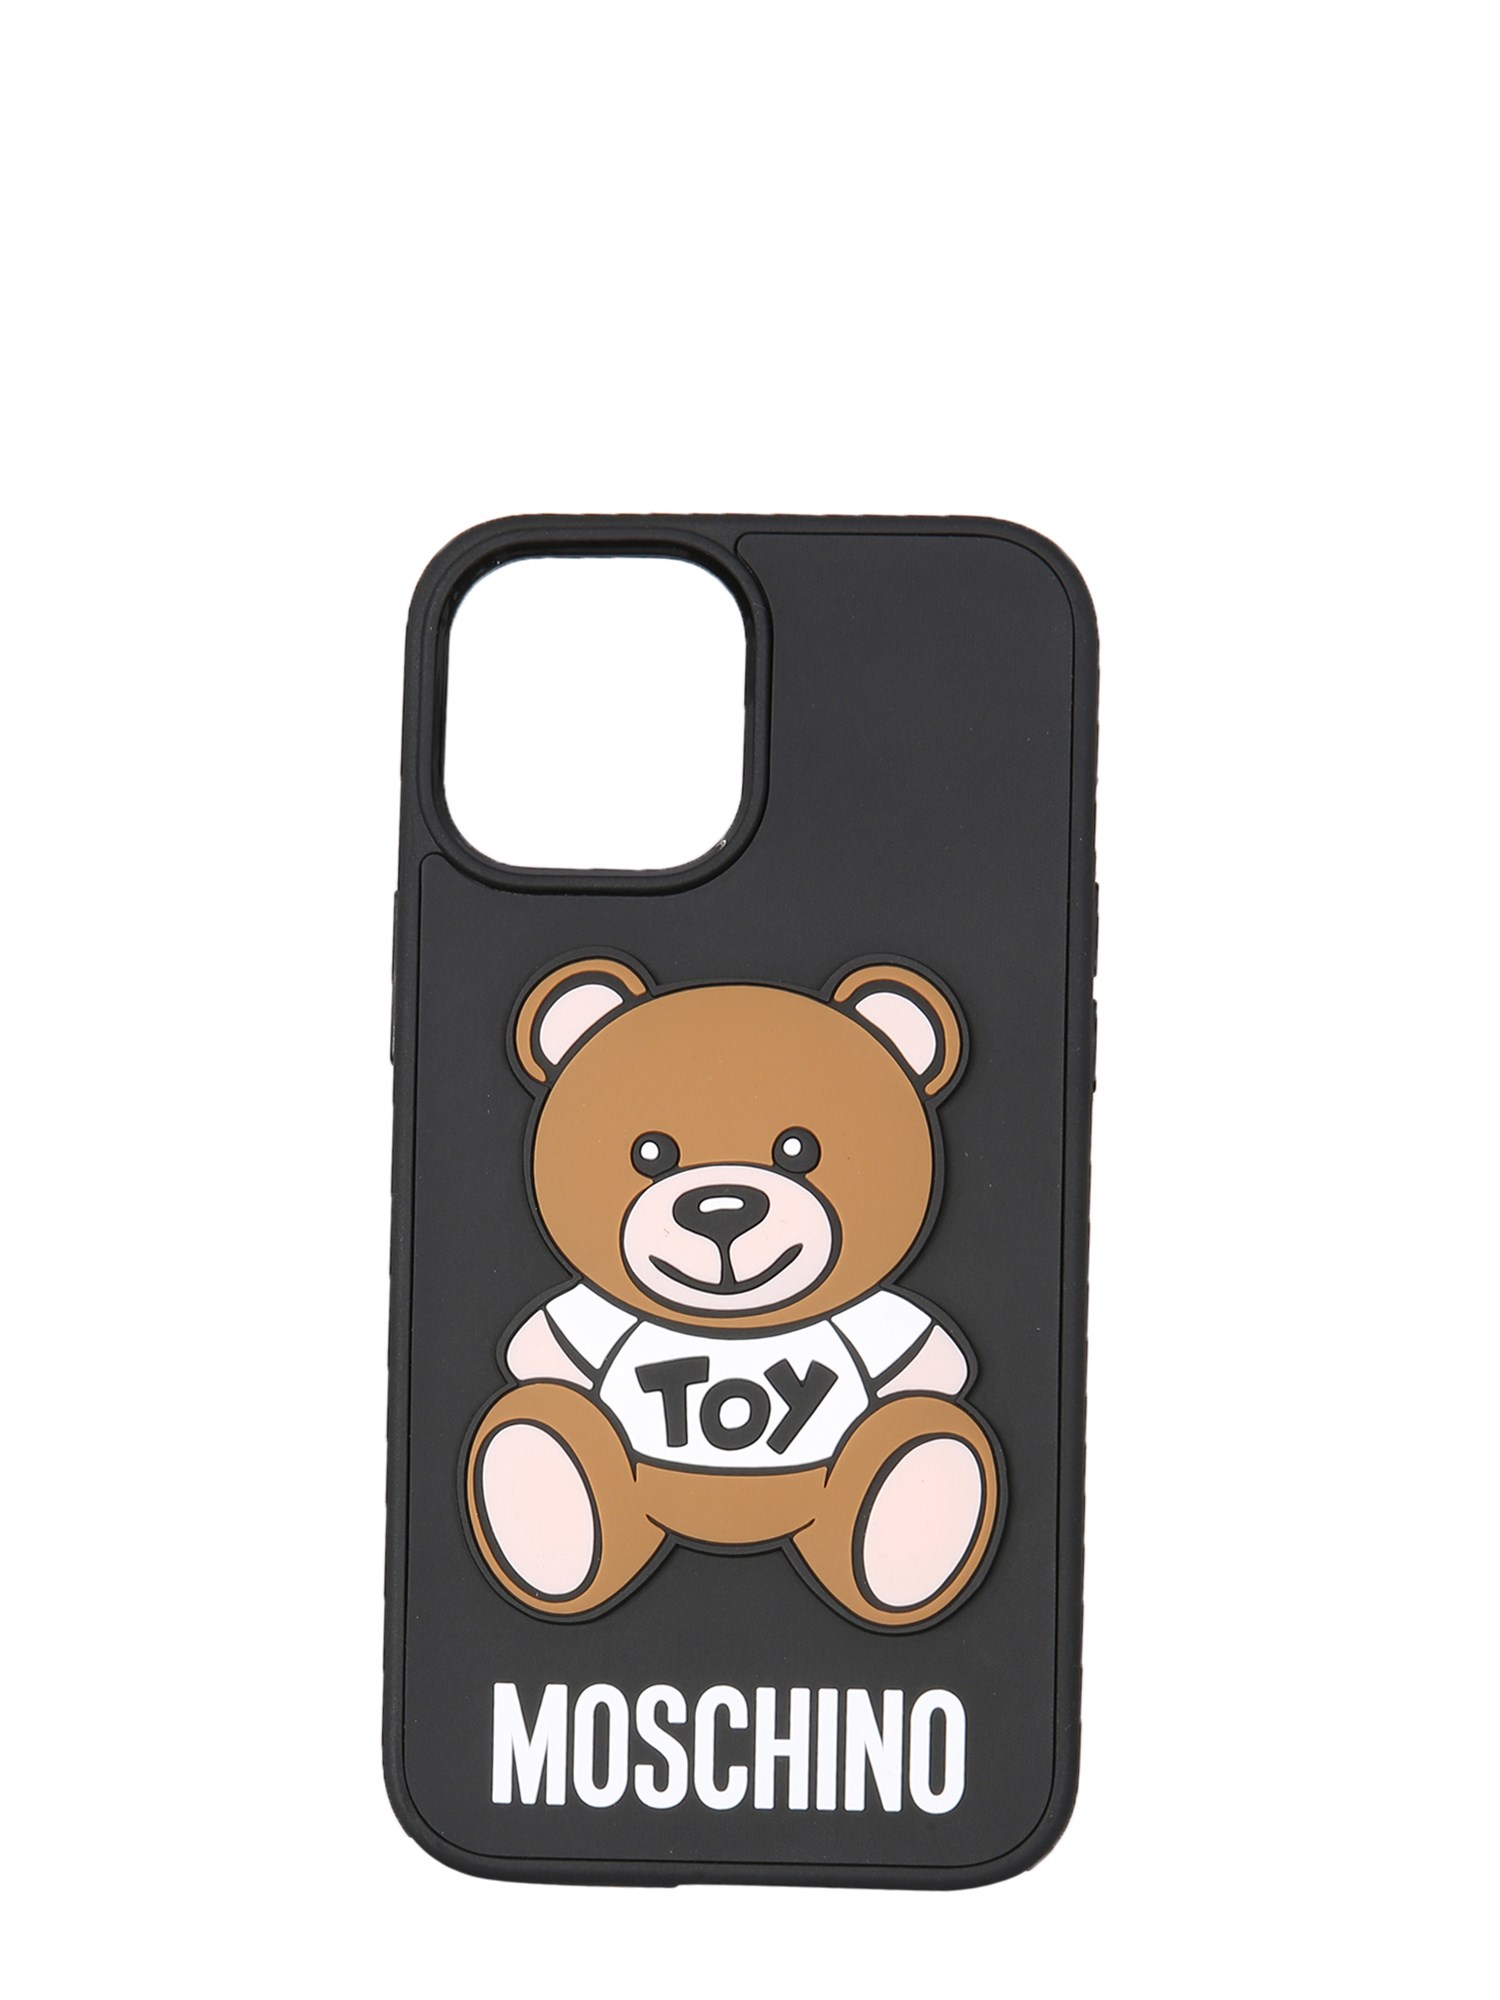 moschino iphone 12 pro max cover